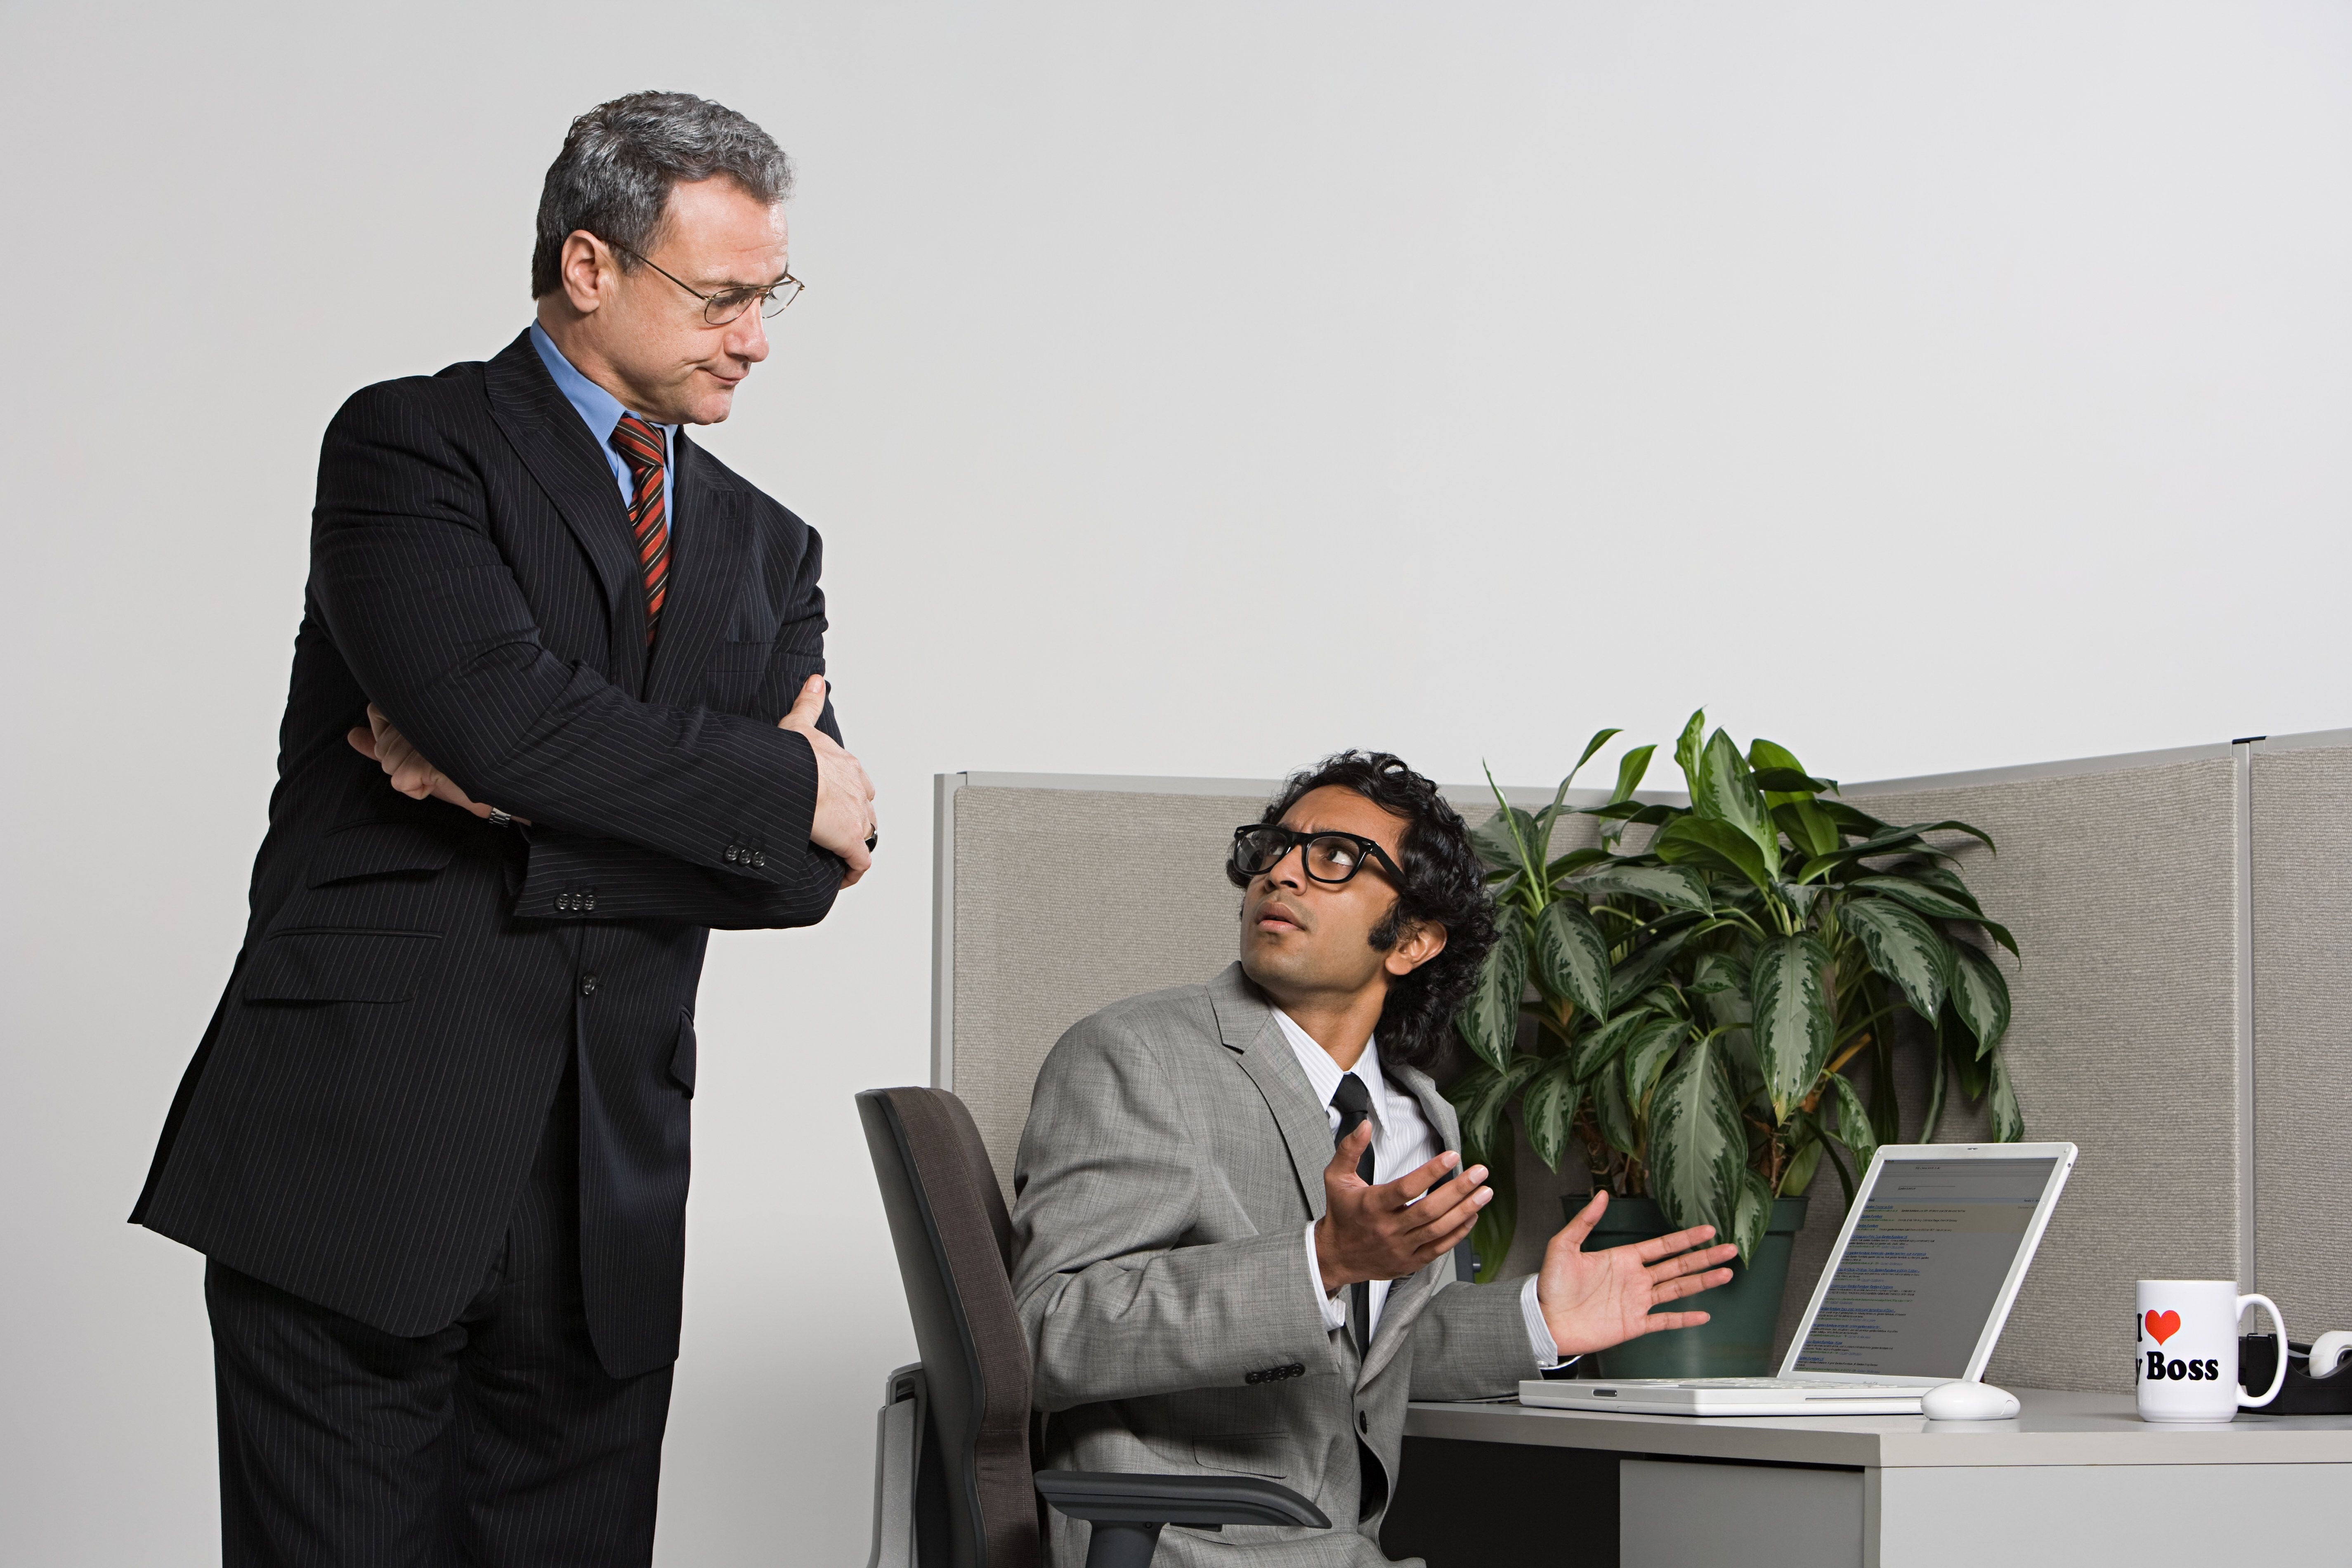 Learn to Deal with a Bad Boss at Work